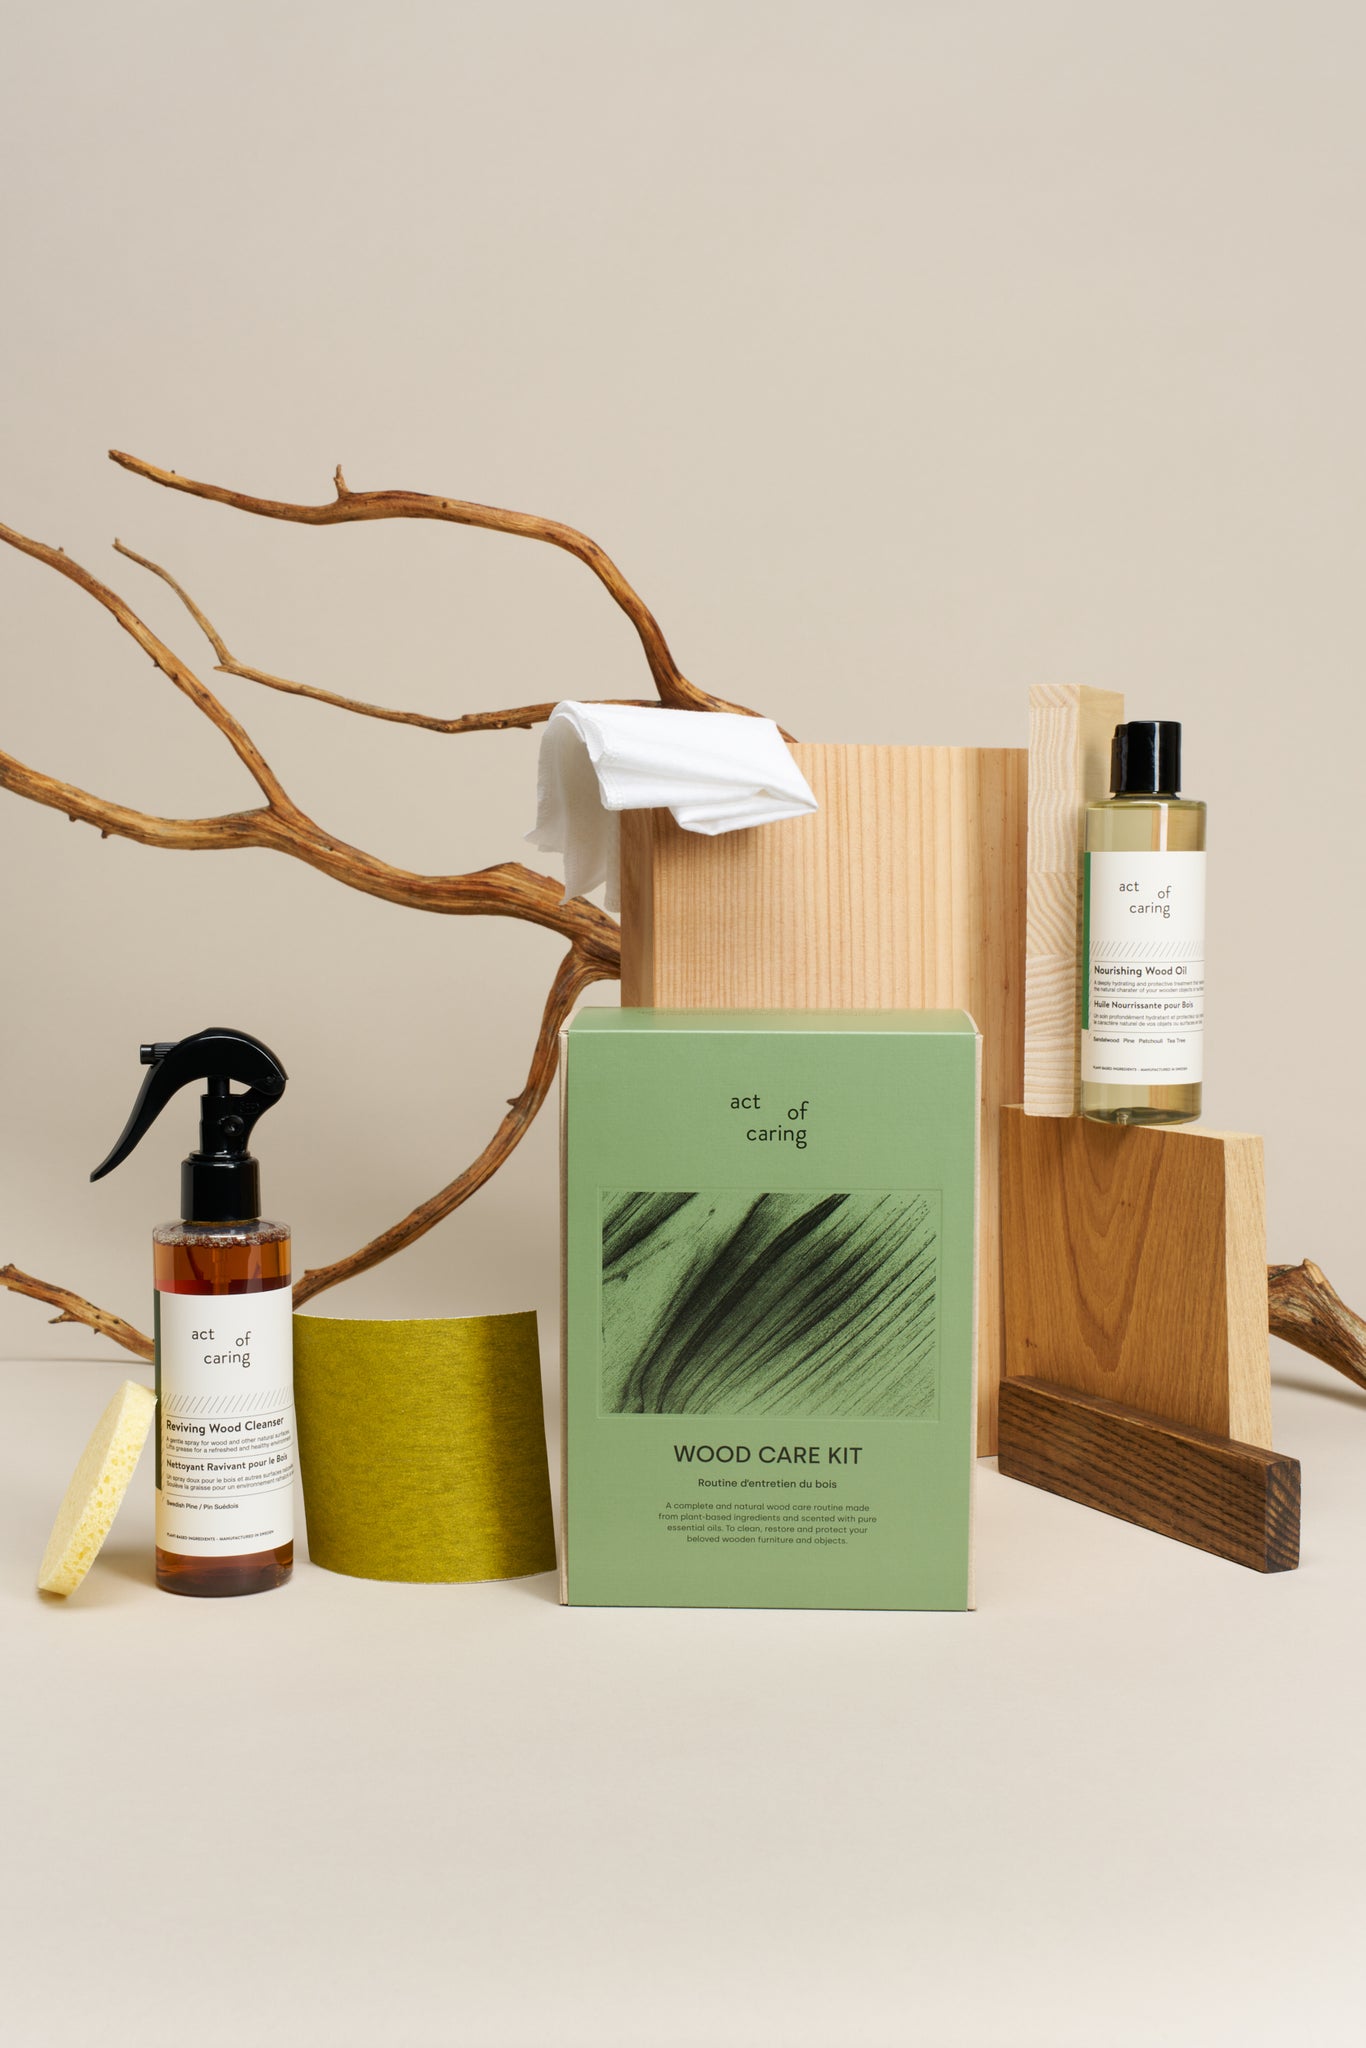 Wood Care Kit by Act of Caring